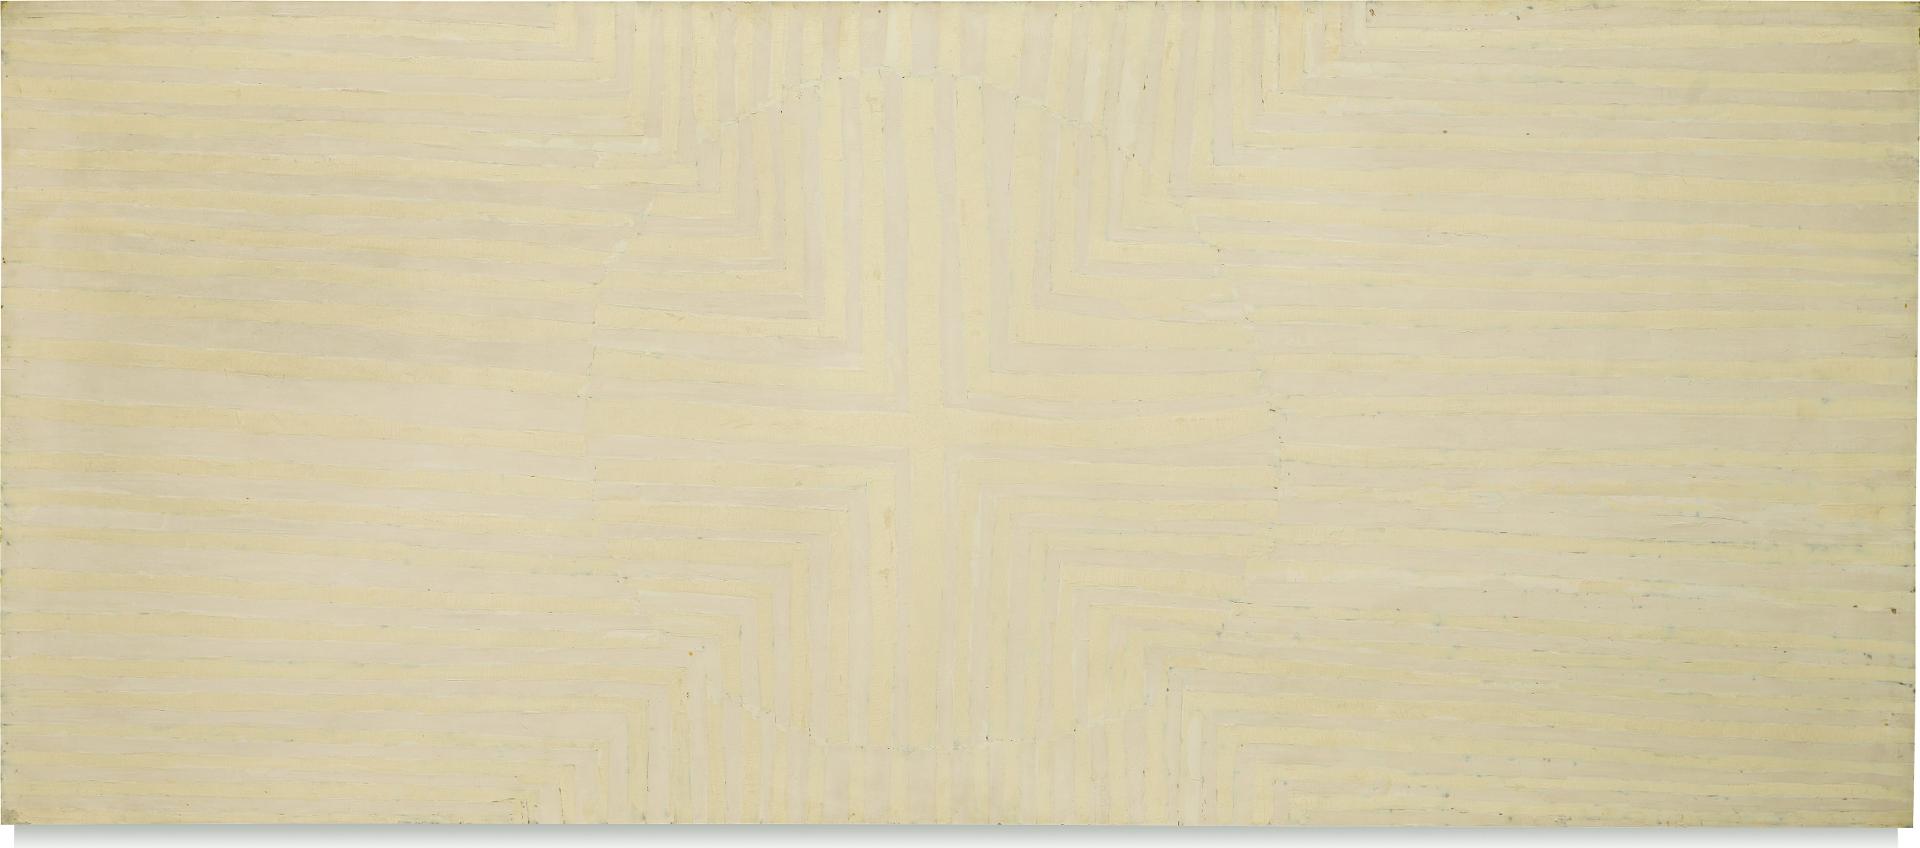 Ronald Langley Bloore (1925-2009) - White Line Painting No. 1